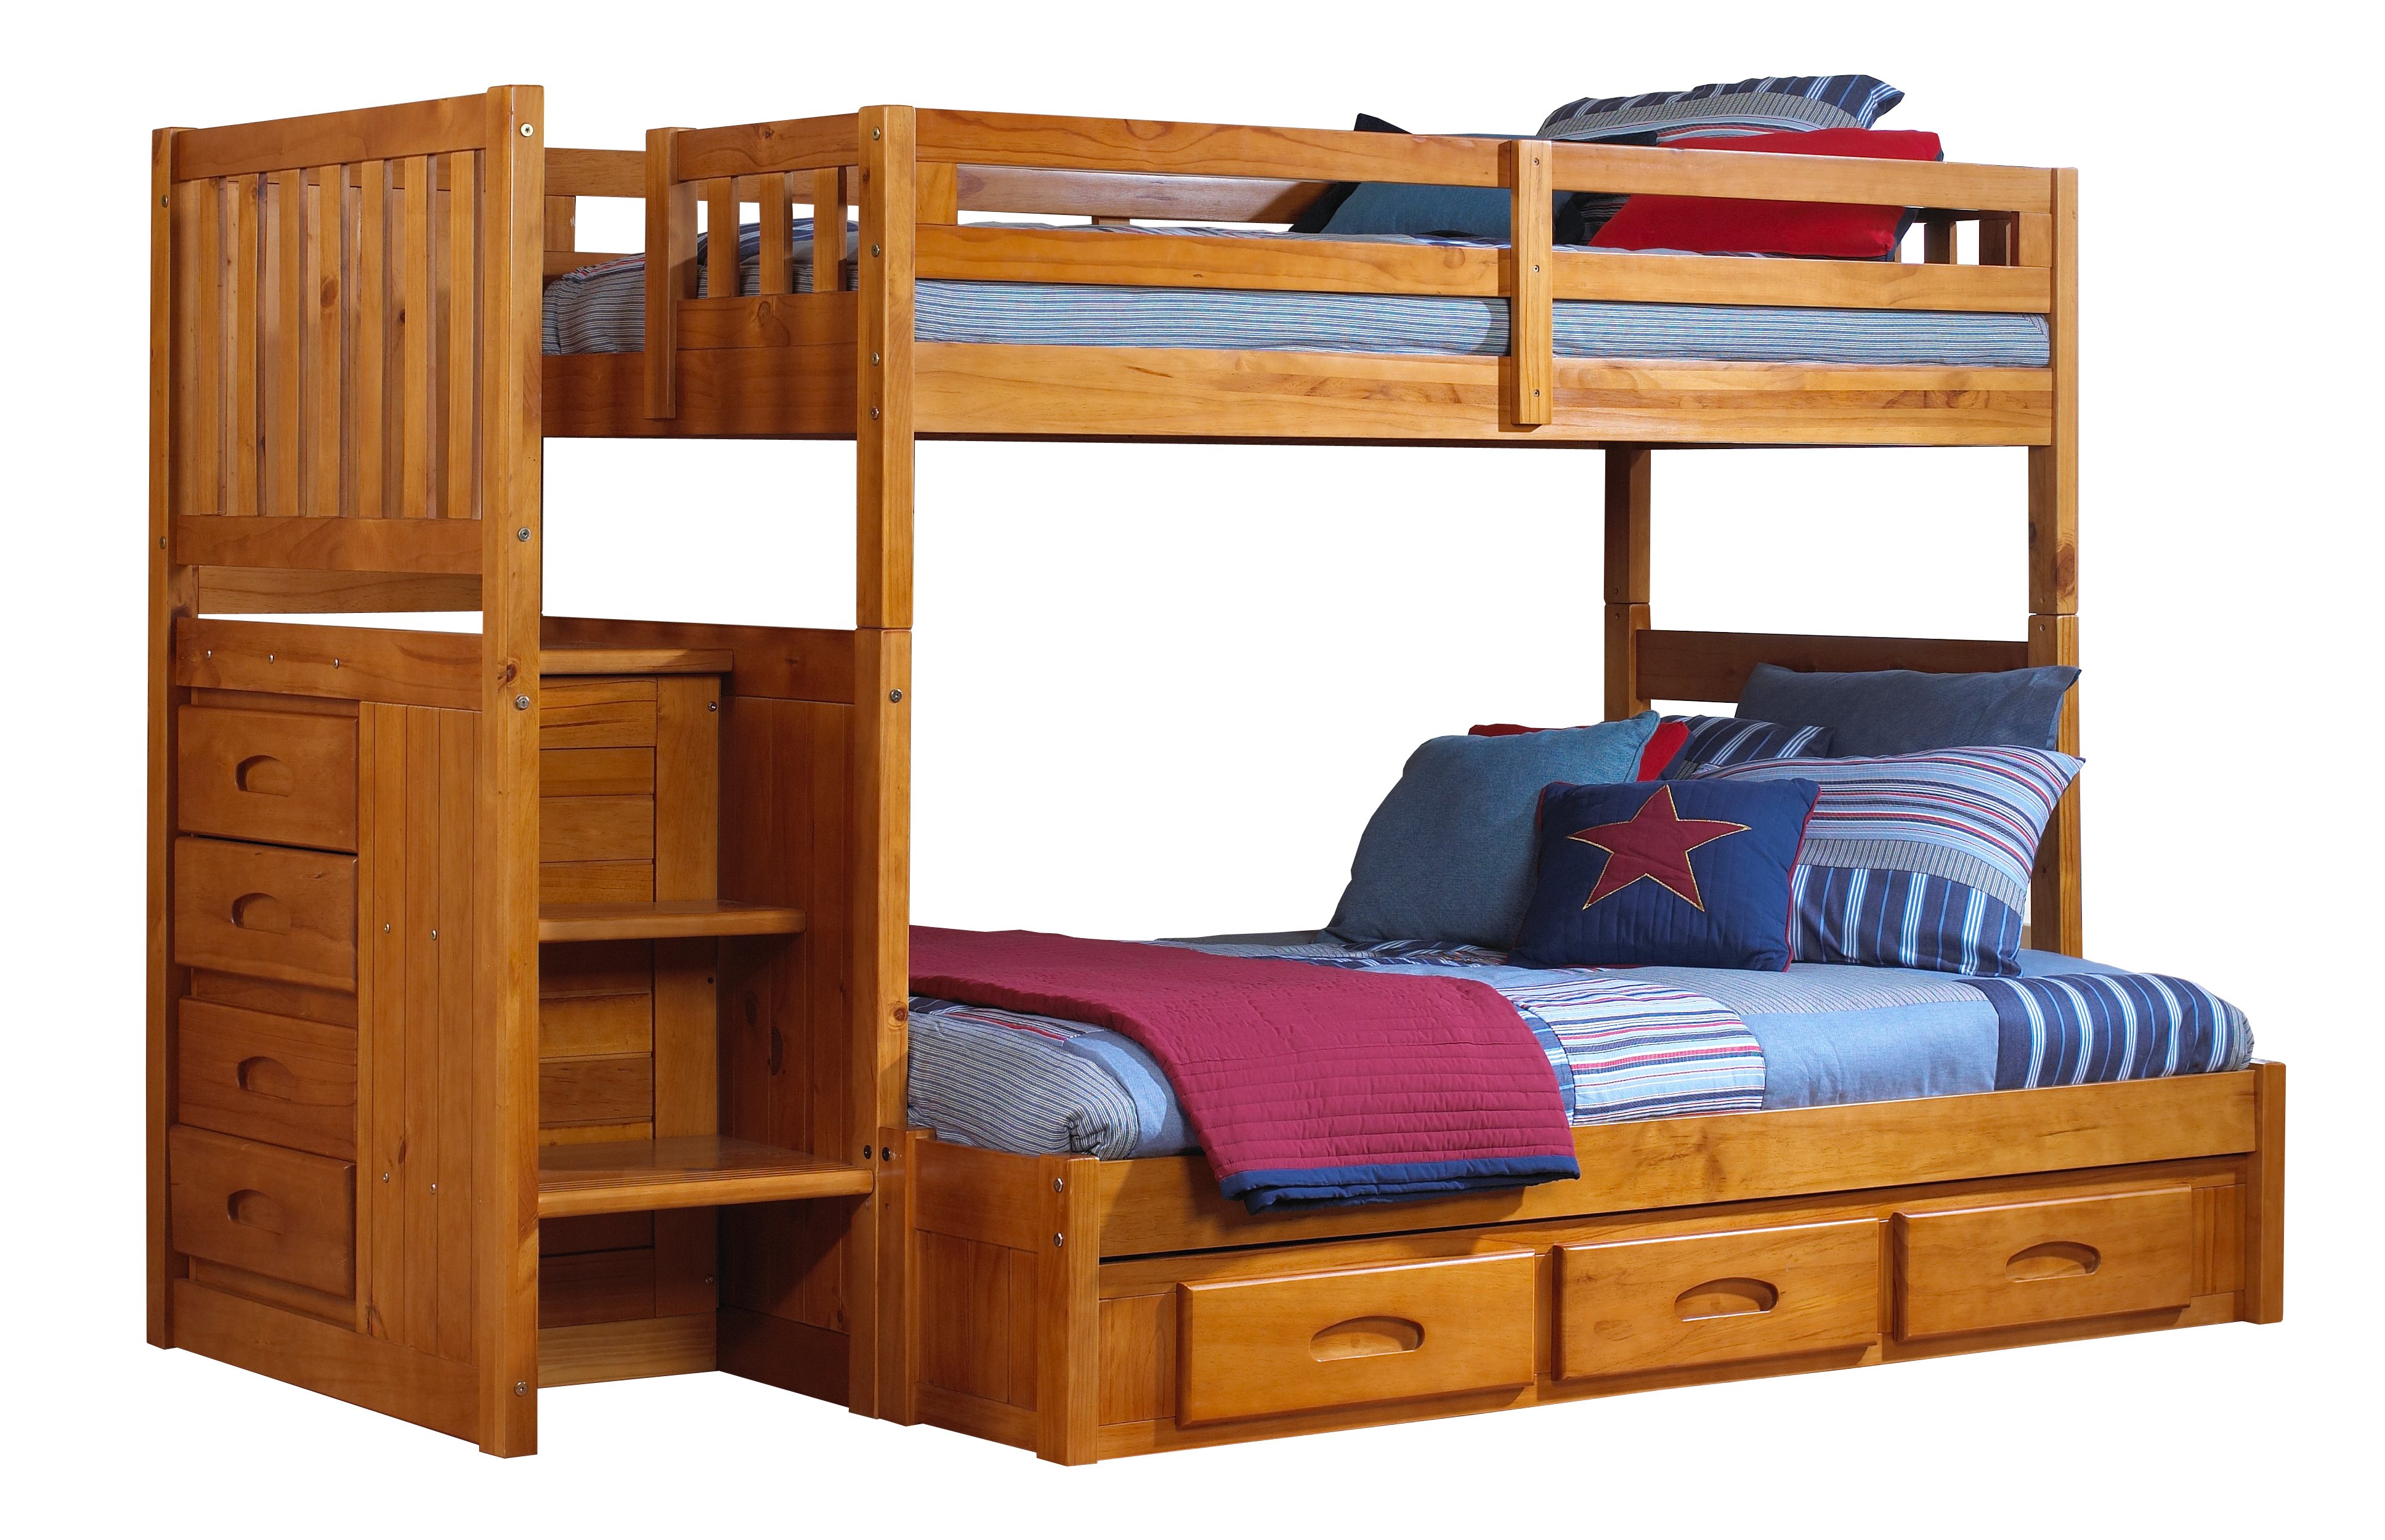 Honey Staircase Bunk Bed, Bunk Beds For Kids Full Over Full